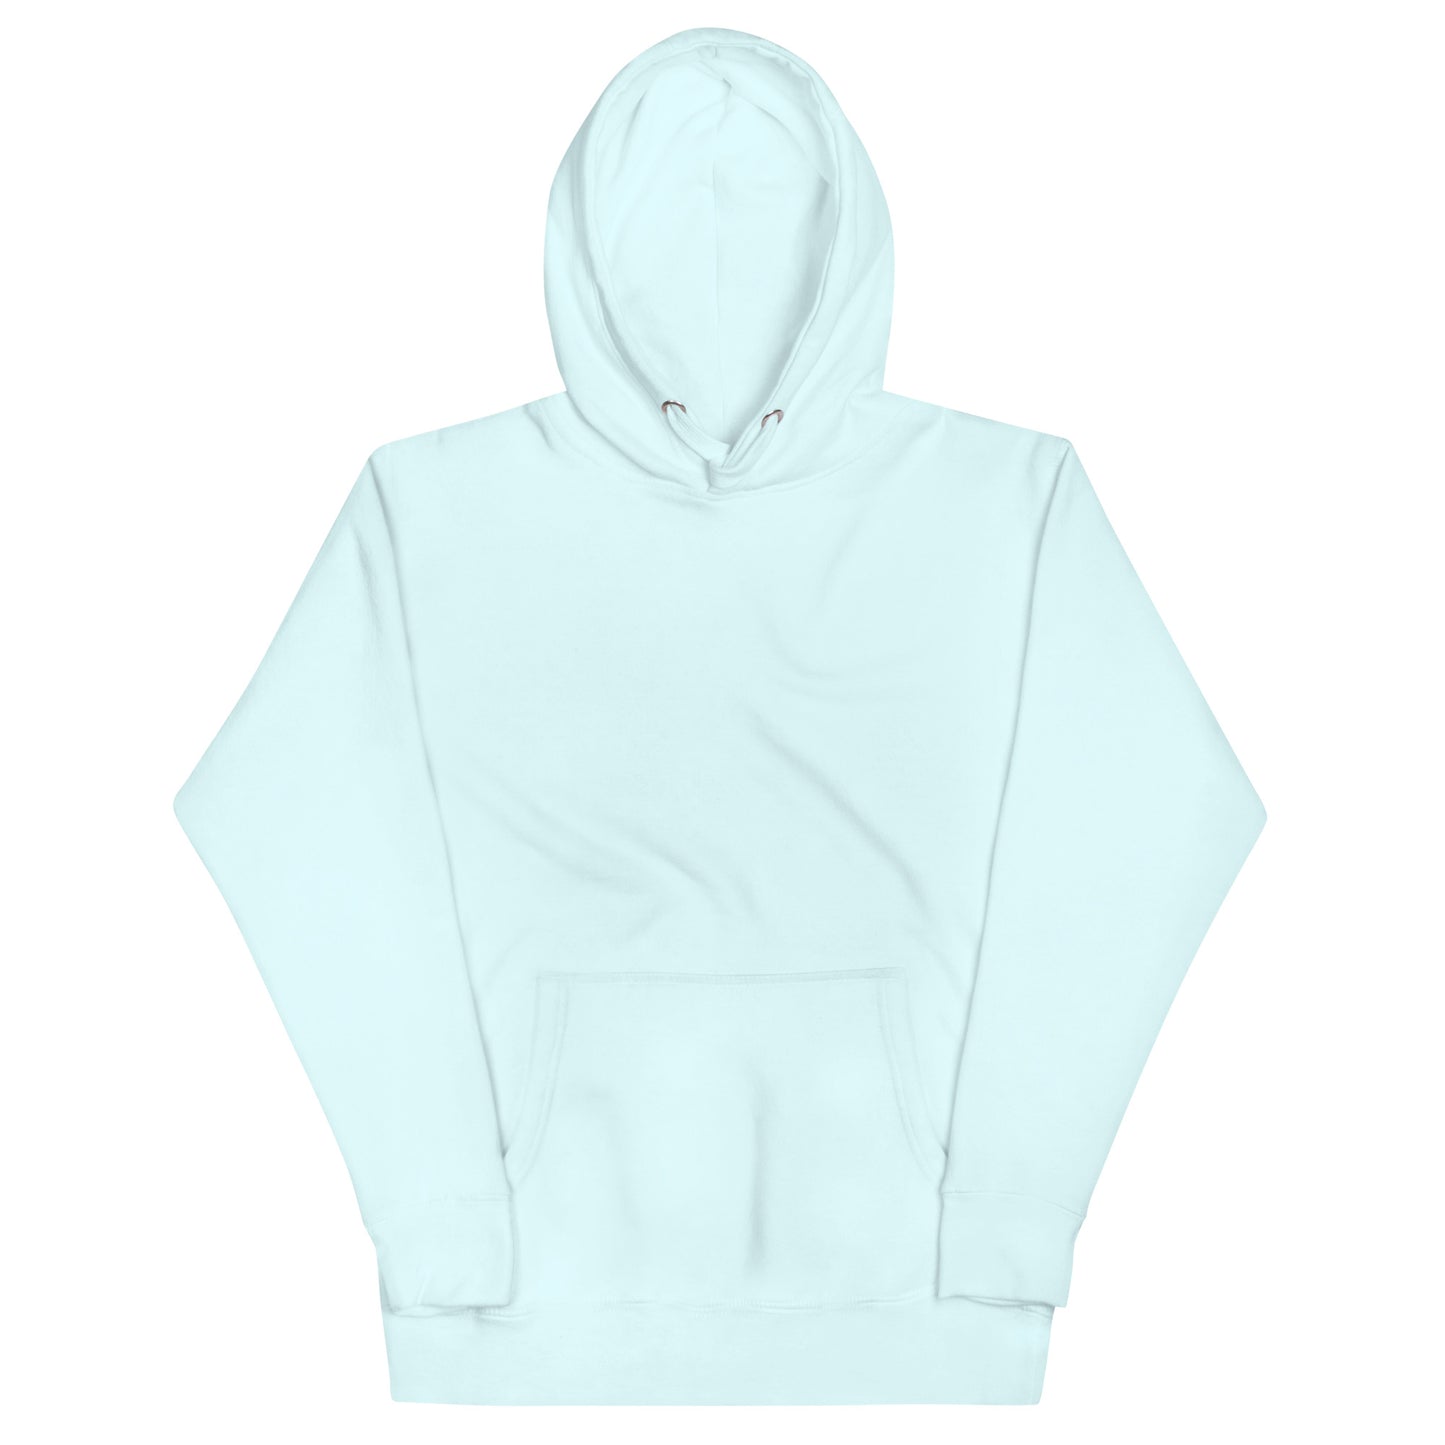 Bites That Changed the World Women's Hoodie